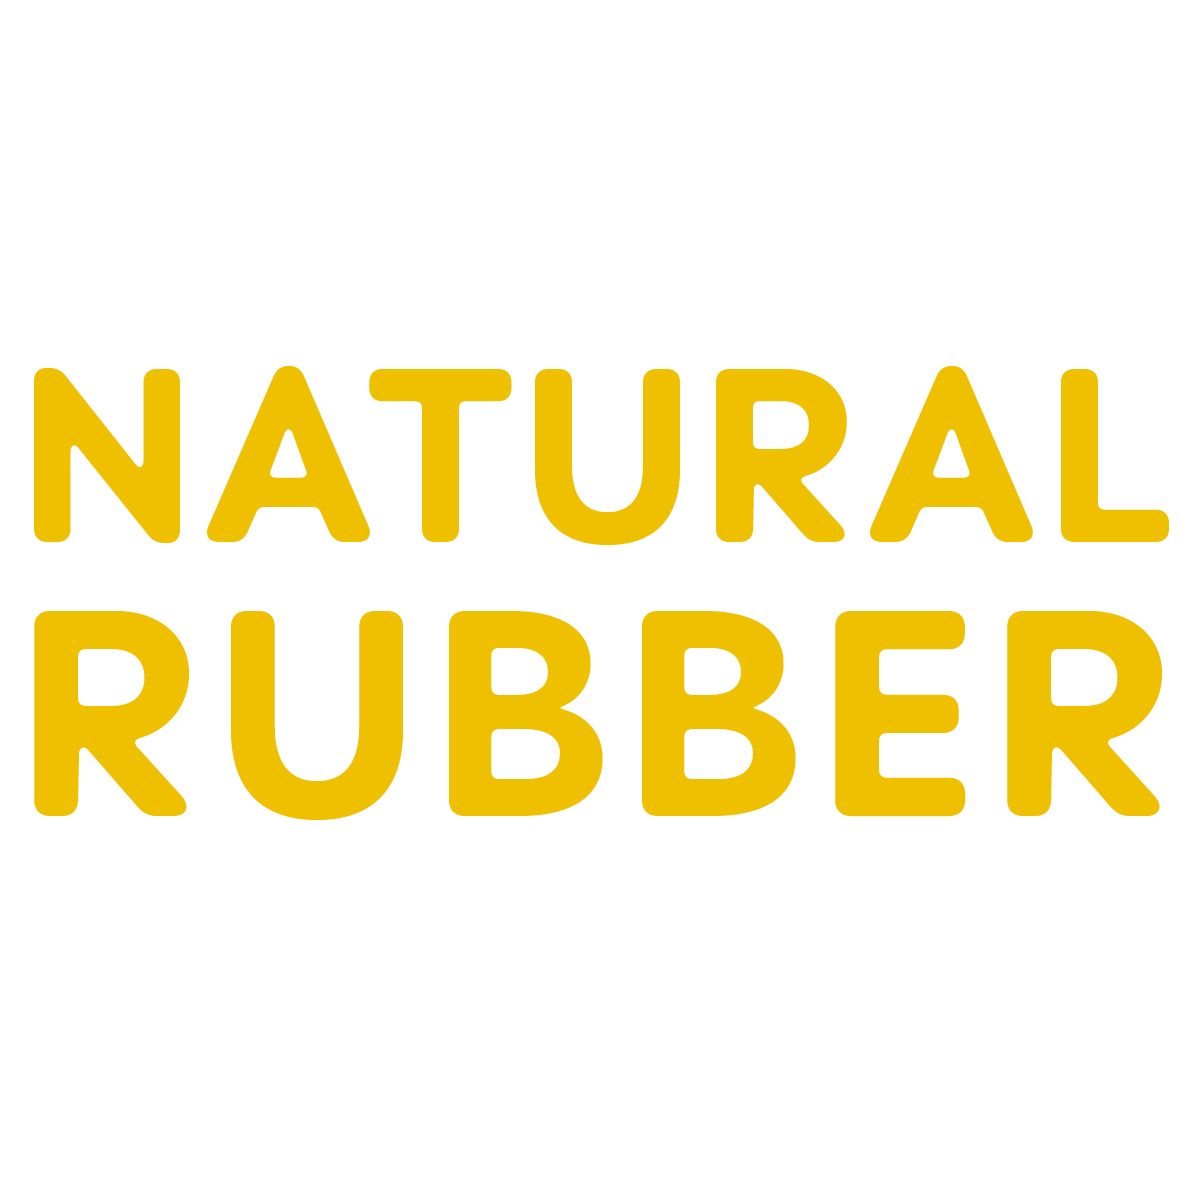 Natural Rubber: naturally soft and bite resistant